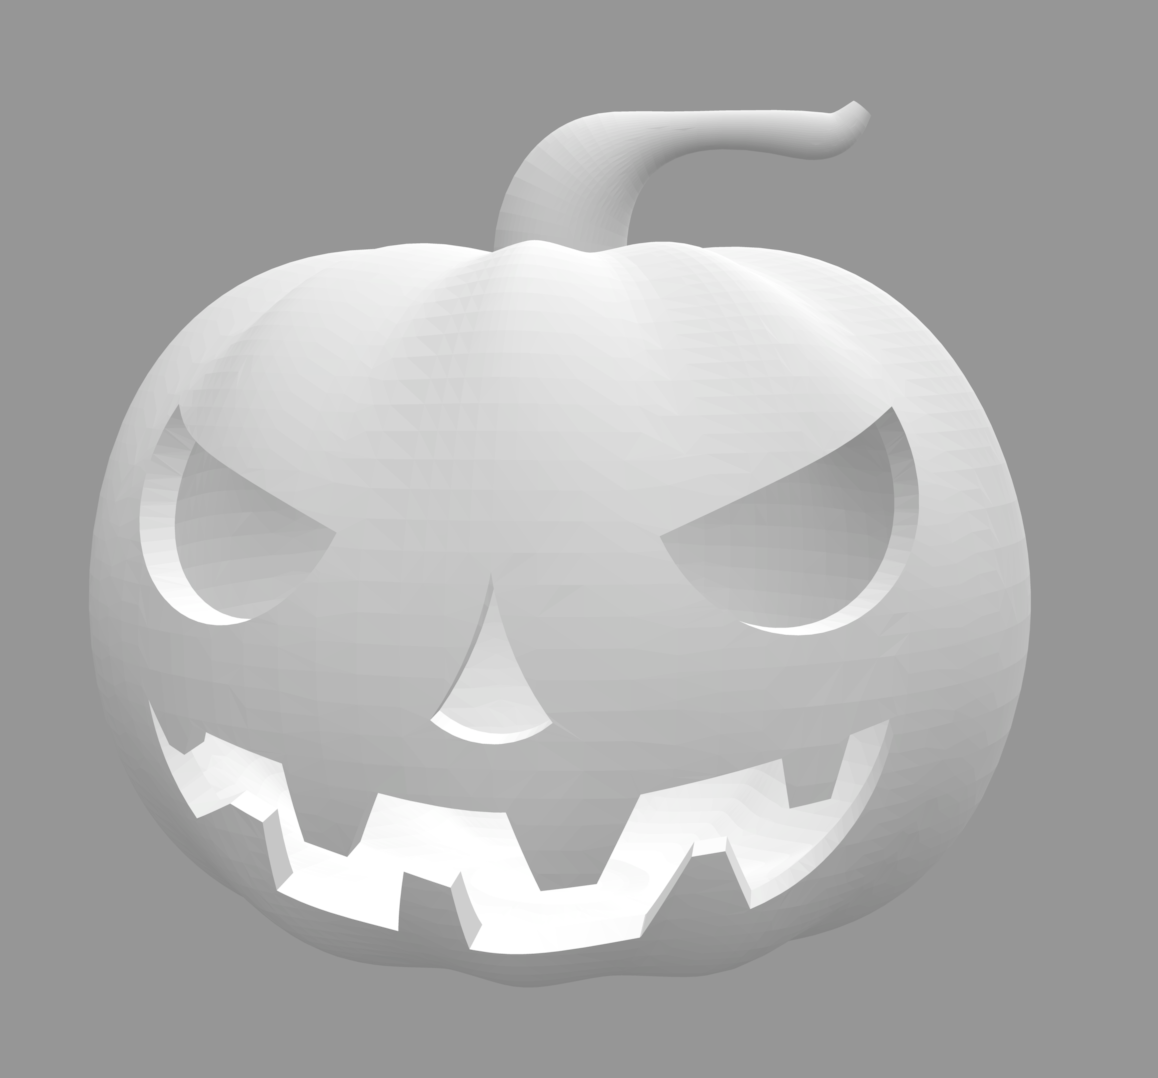 We Have Prepared a 3DSPRO Jack-o'-lantern for ALL